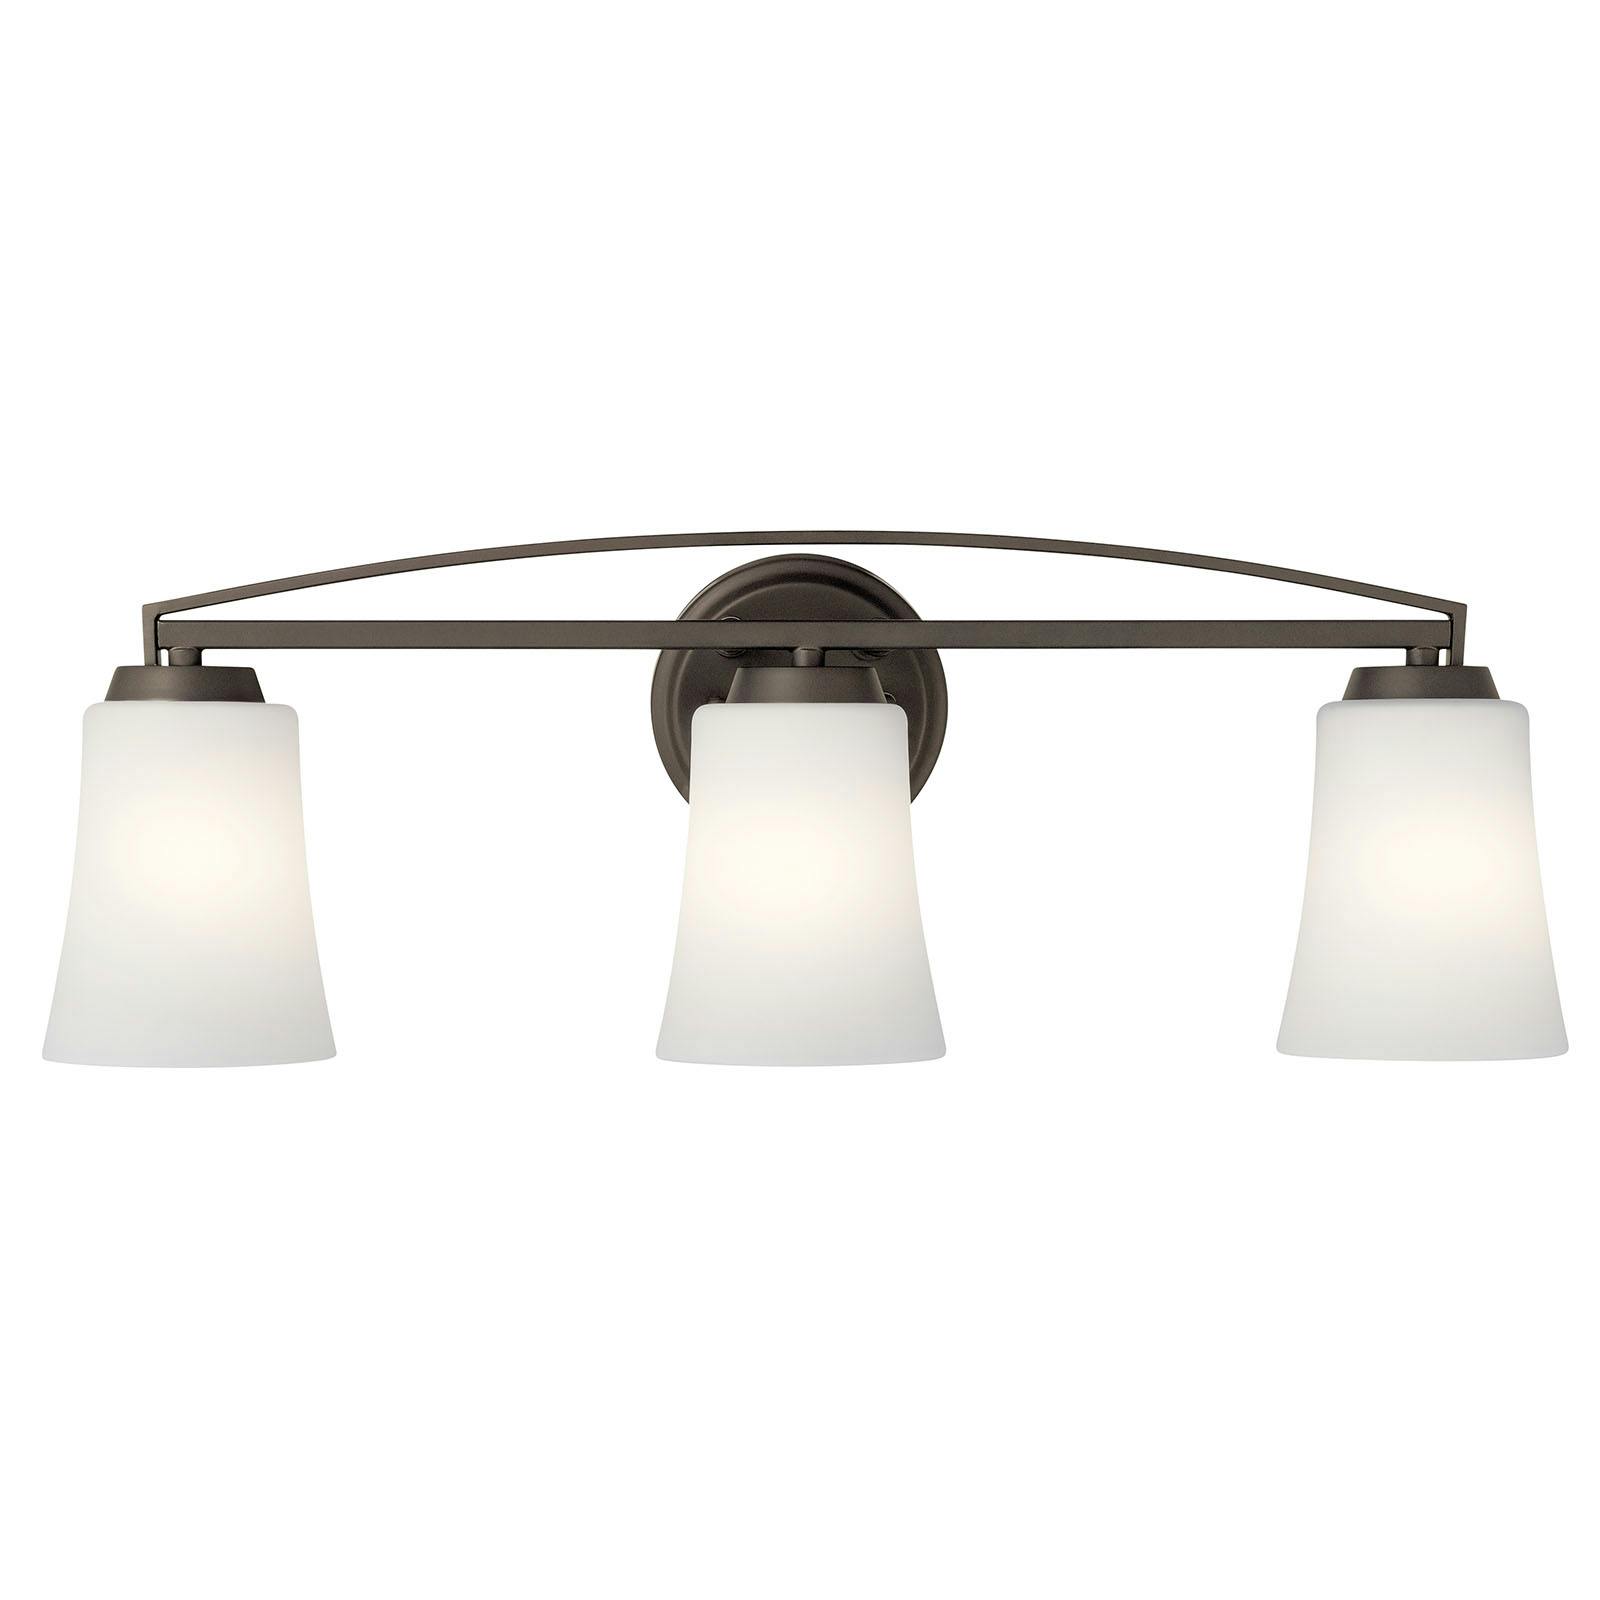 The Tao 3 Light Vanity Light Olde Bronze® facing down on a white background